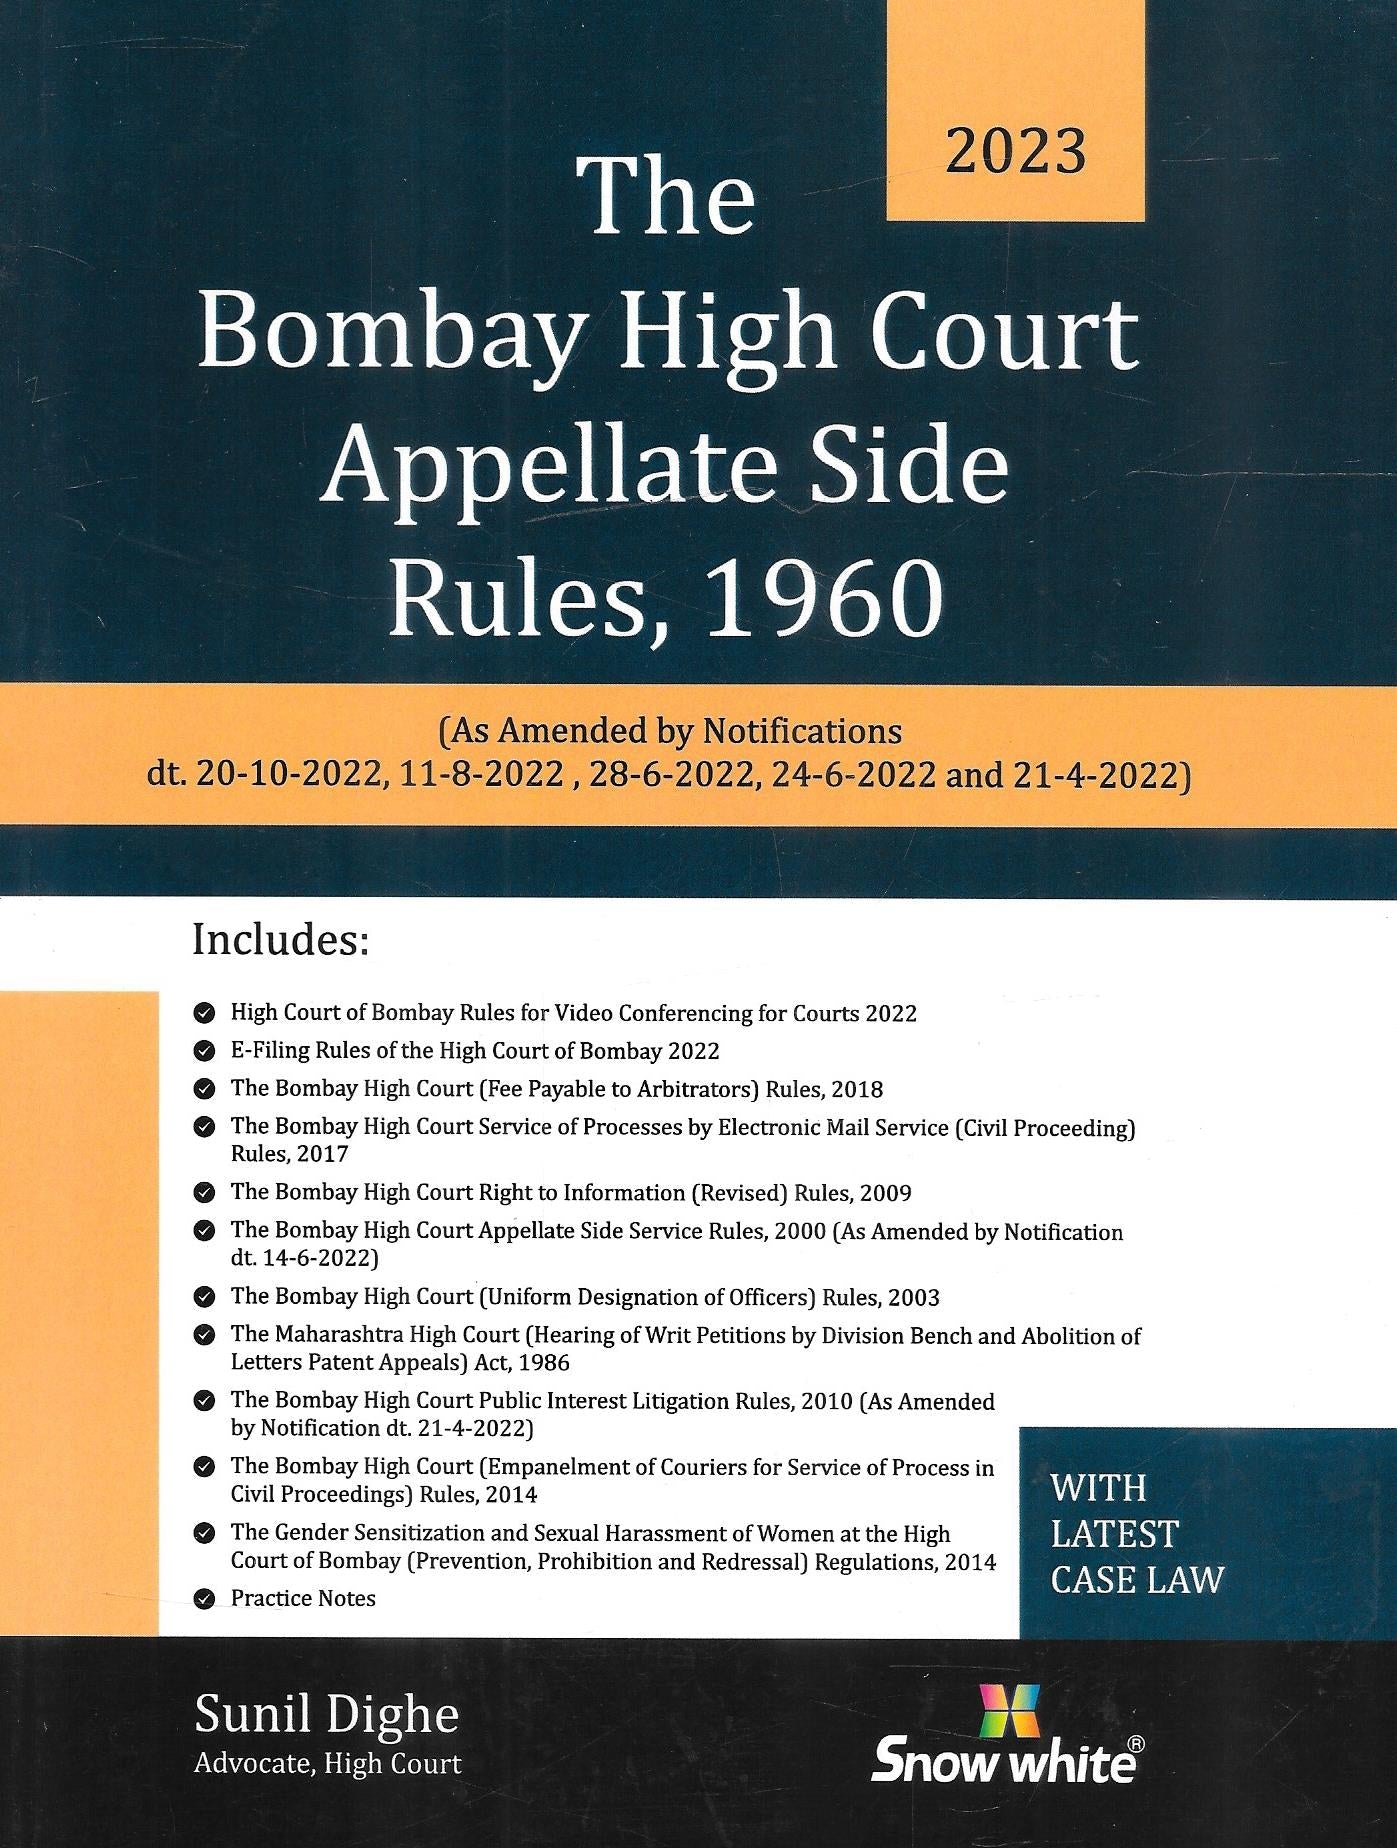 The Bombay High Court Appellate Side Rules, 1960